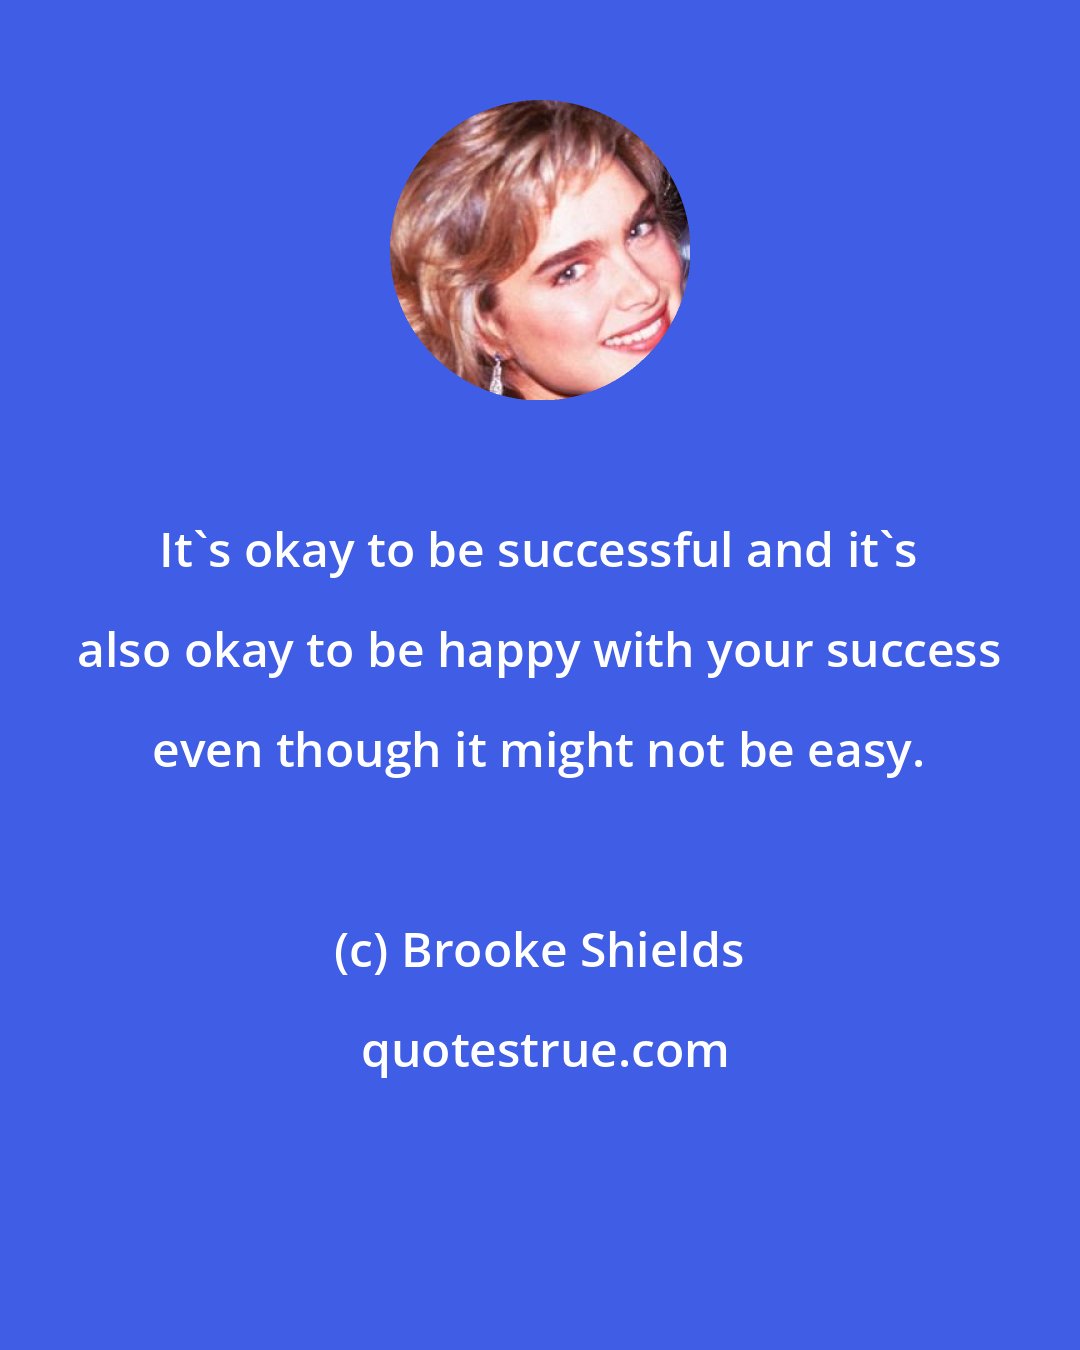 Brooke Shields: It's okay to be successful and it's also okay to be happy with your success even though it might not be easy.